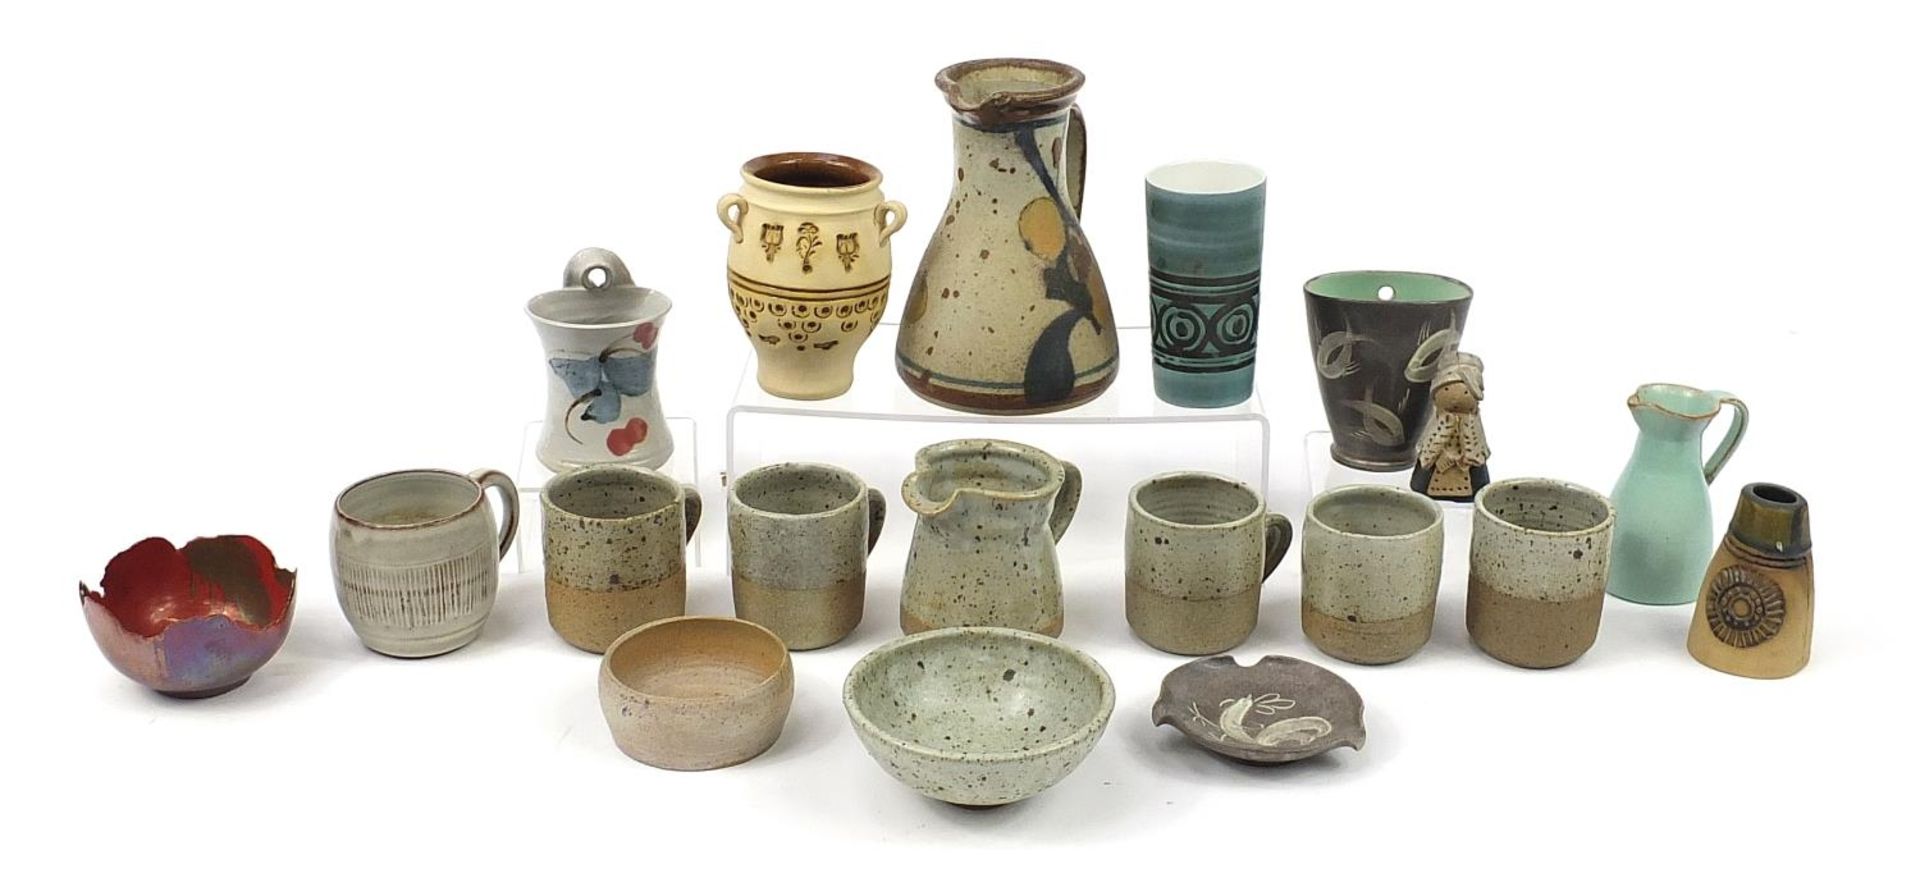 Studio pottery including vases, jugs and mugs, the largest 18cm high